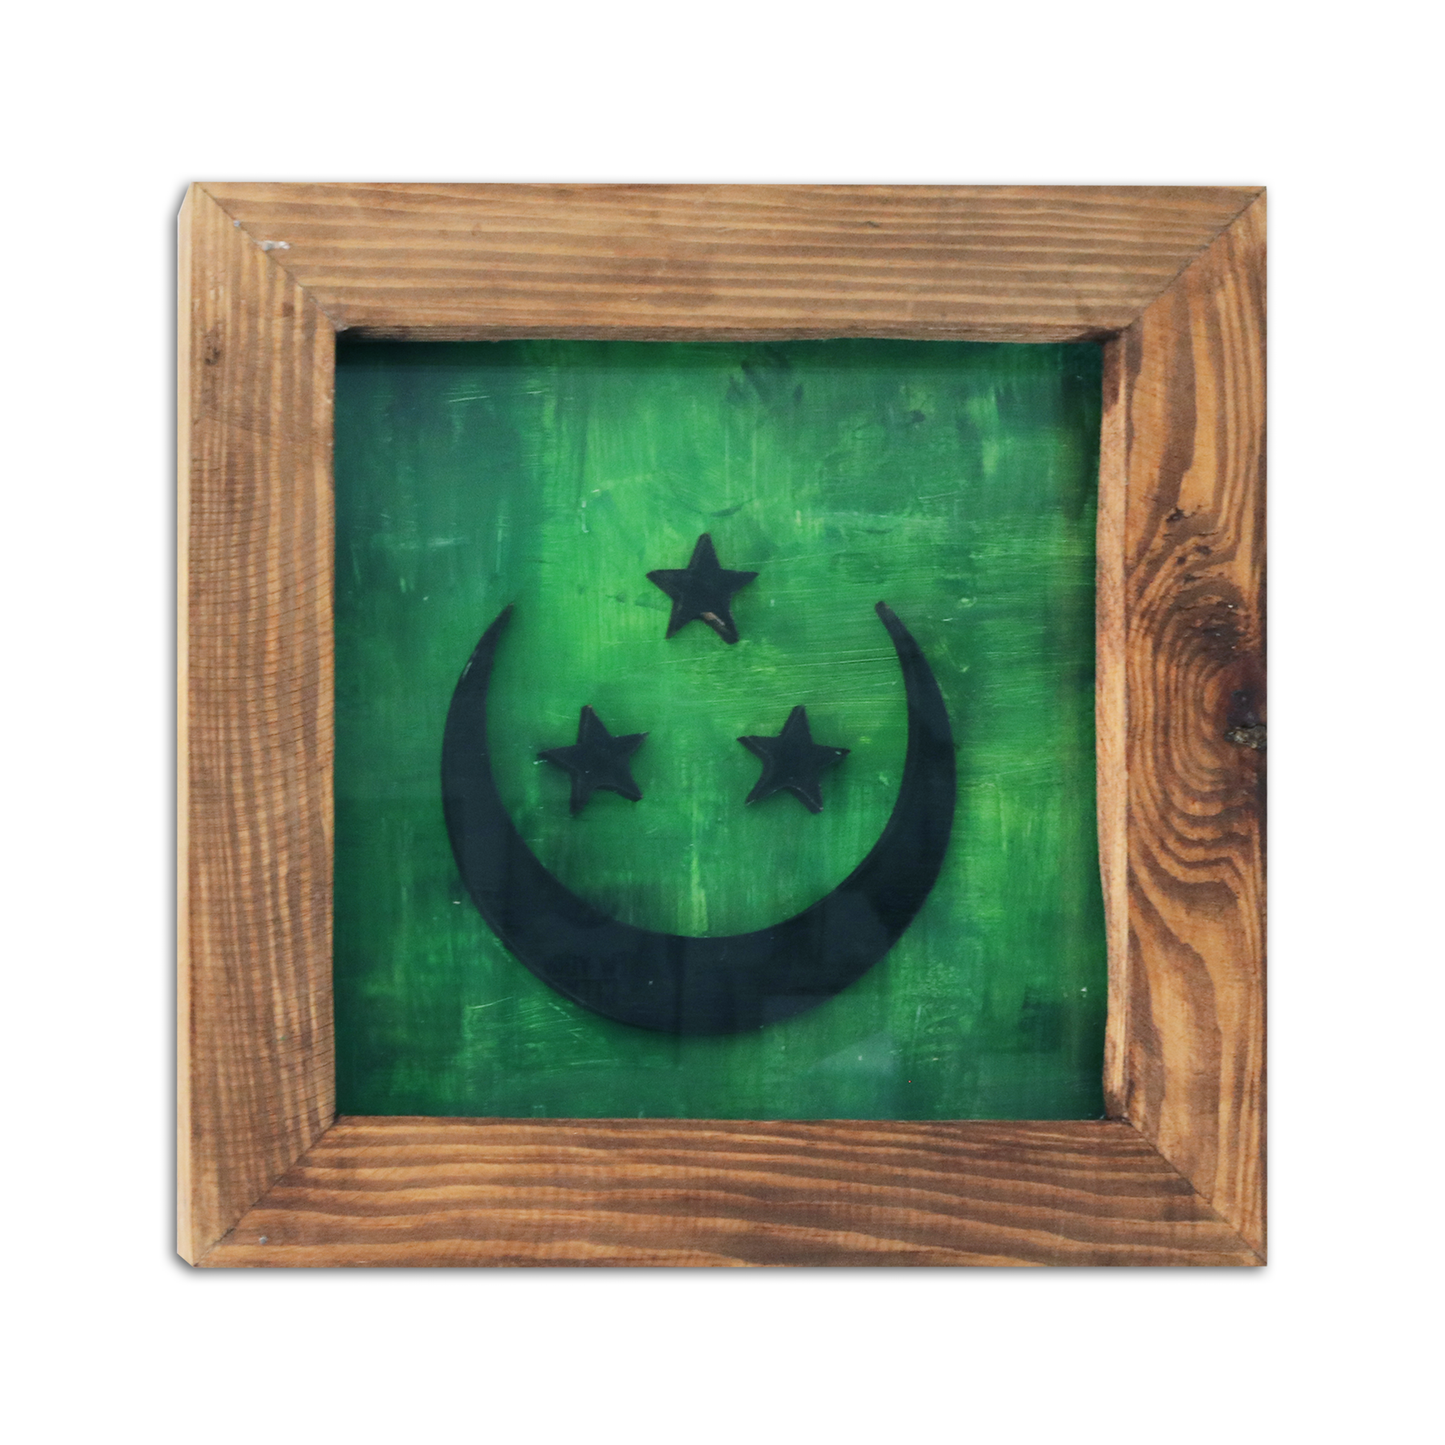 Egyptian Flag Green Square Painting